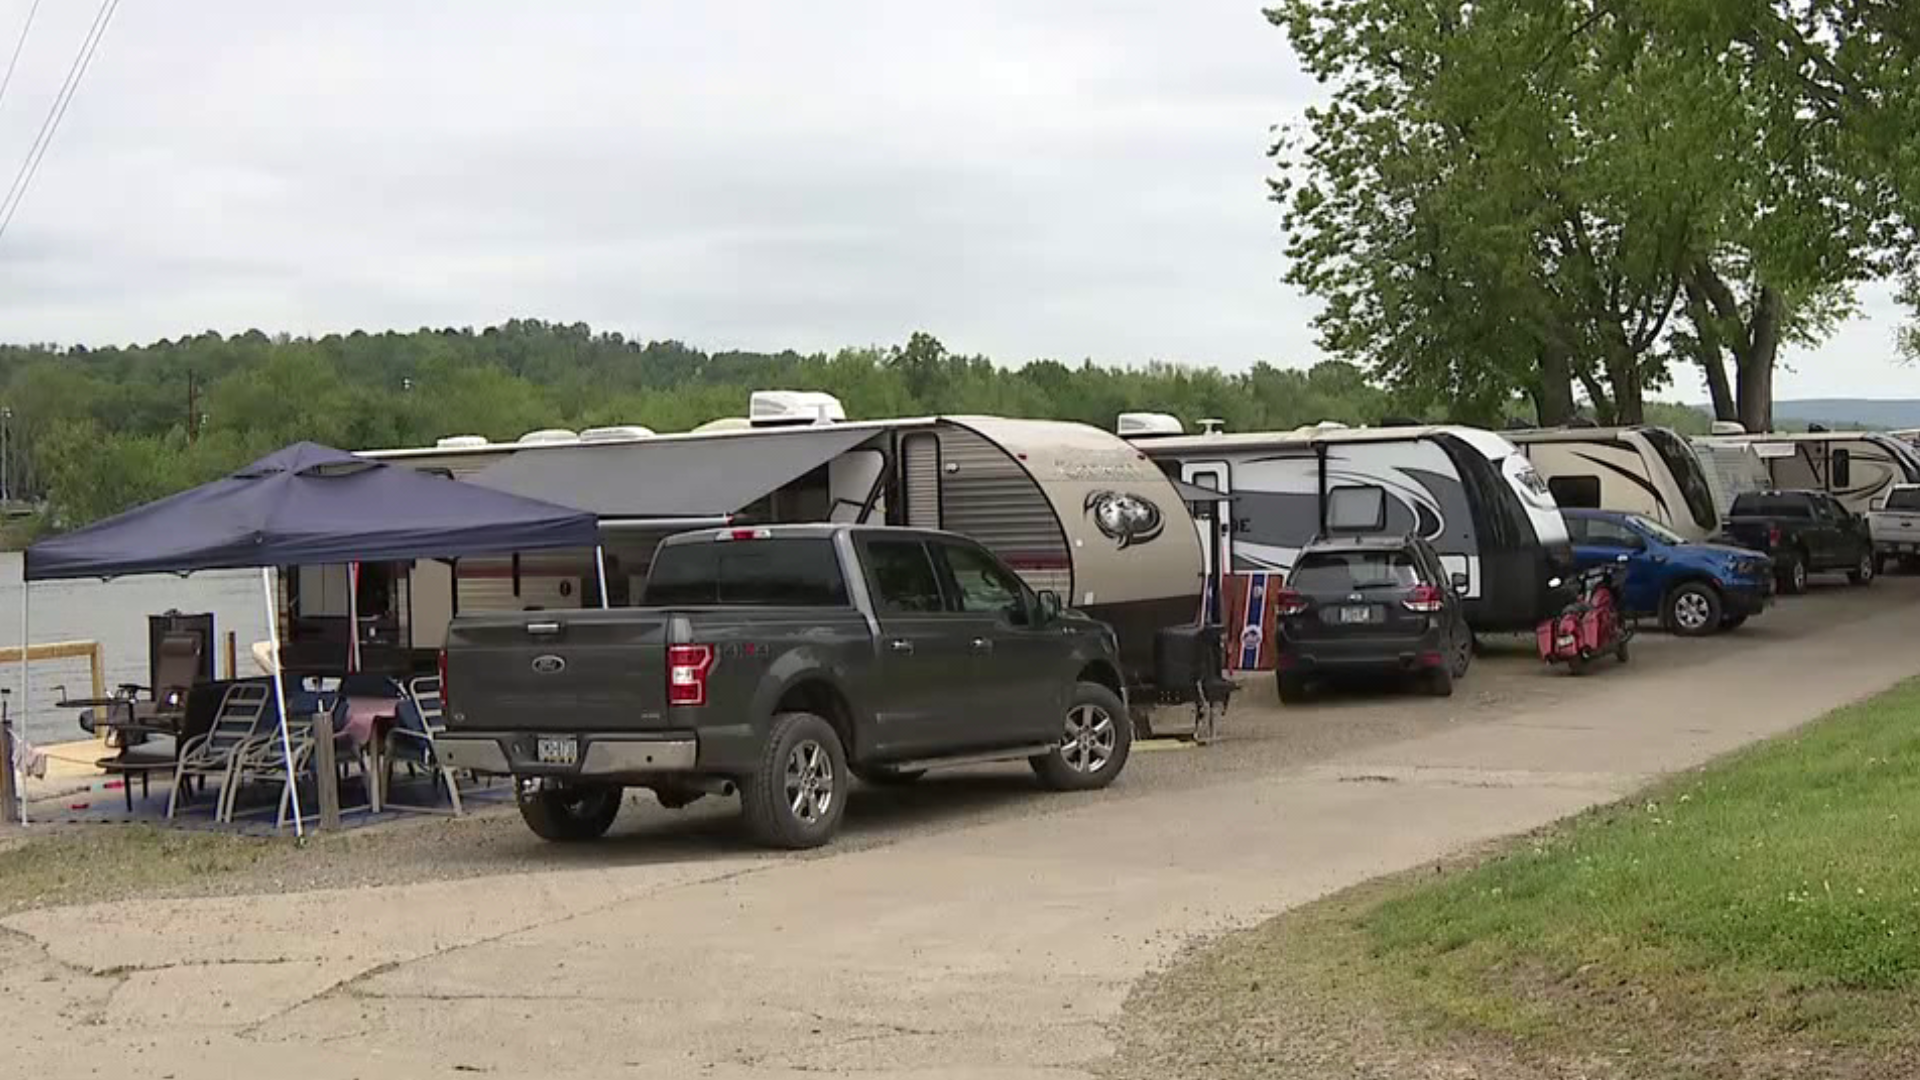 Memorial Day Weekend is a busy time of year at many campgrounds, and that continued this weekend in Northumberland County, even during the COVID-19 pandemic.